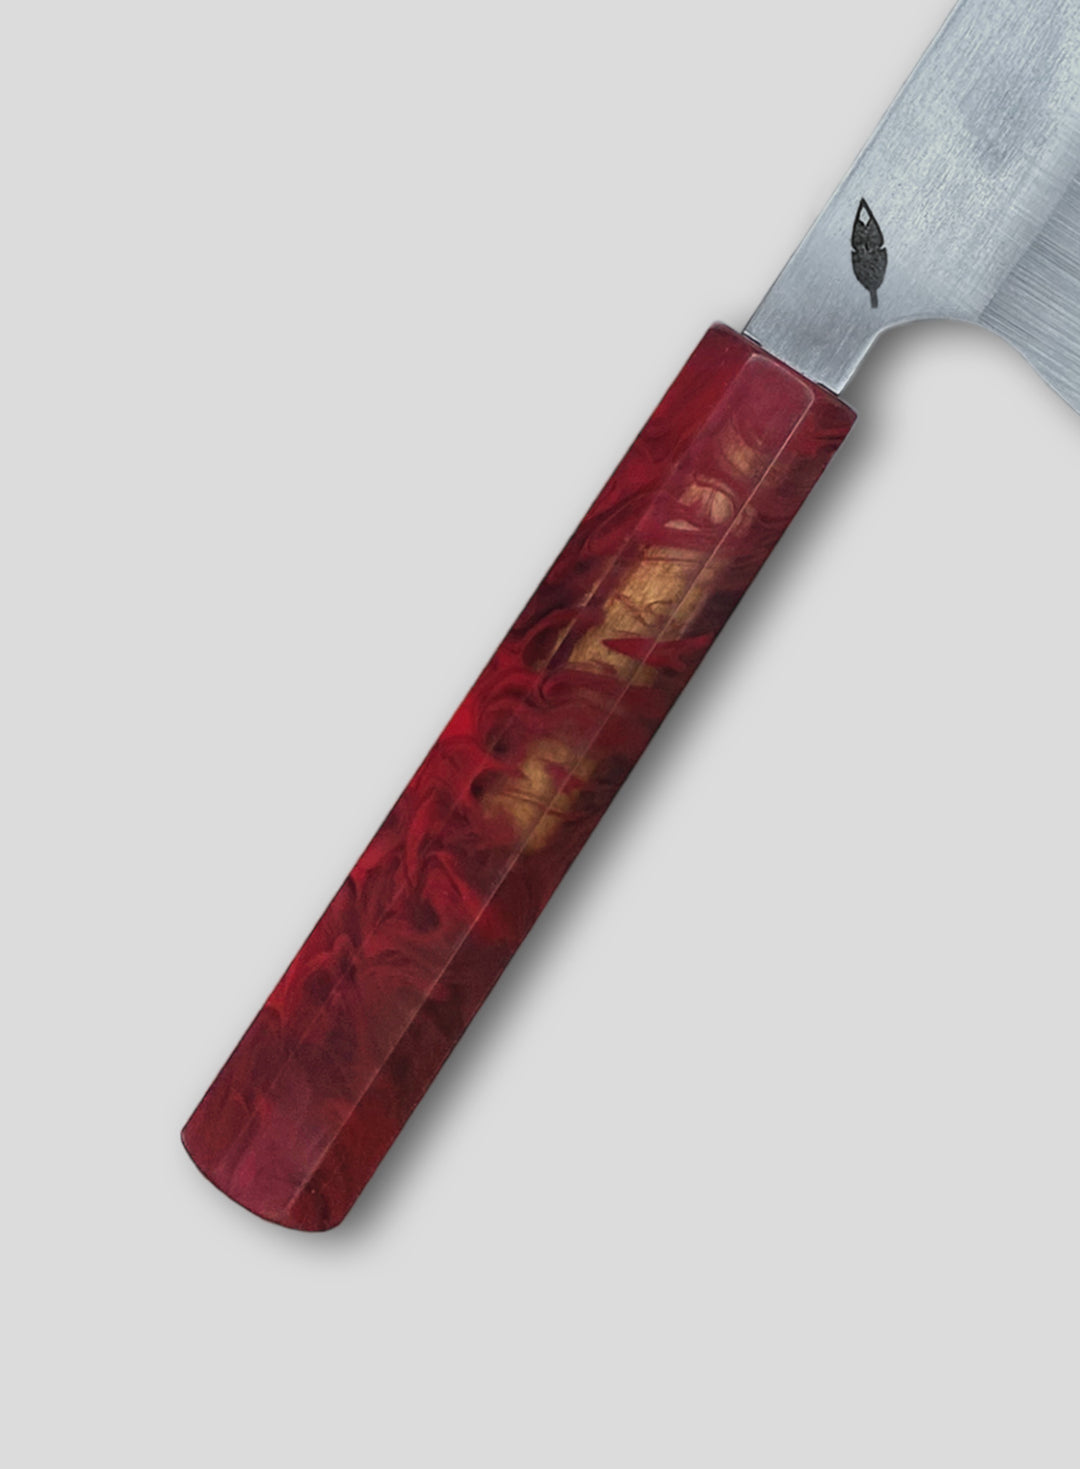 Limited Edition Noa (Red and Transparent Resin Handle)